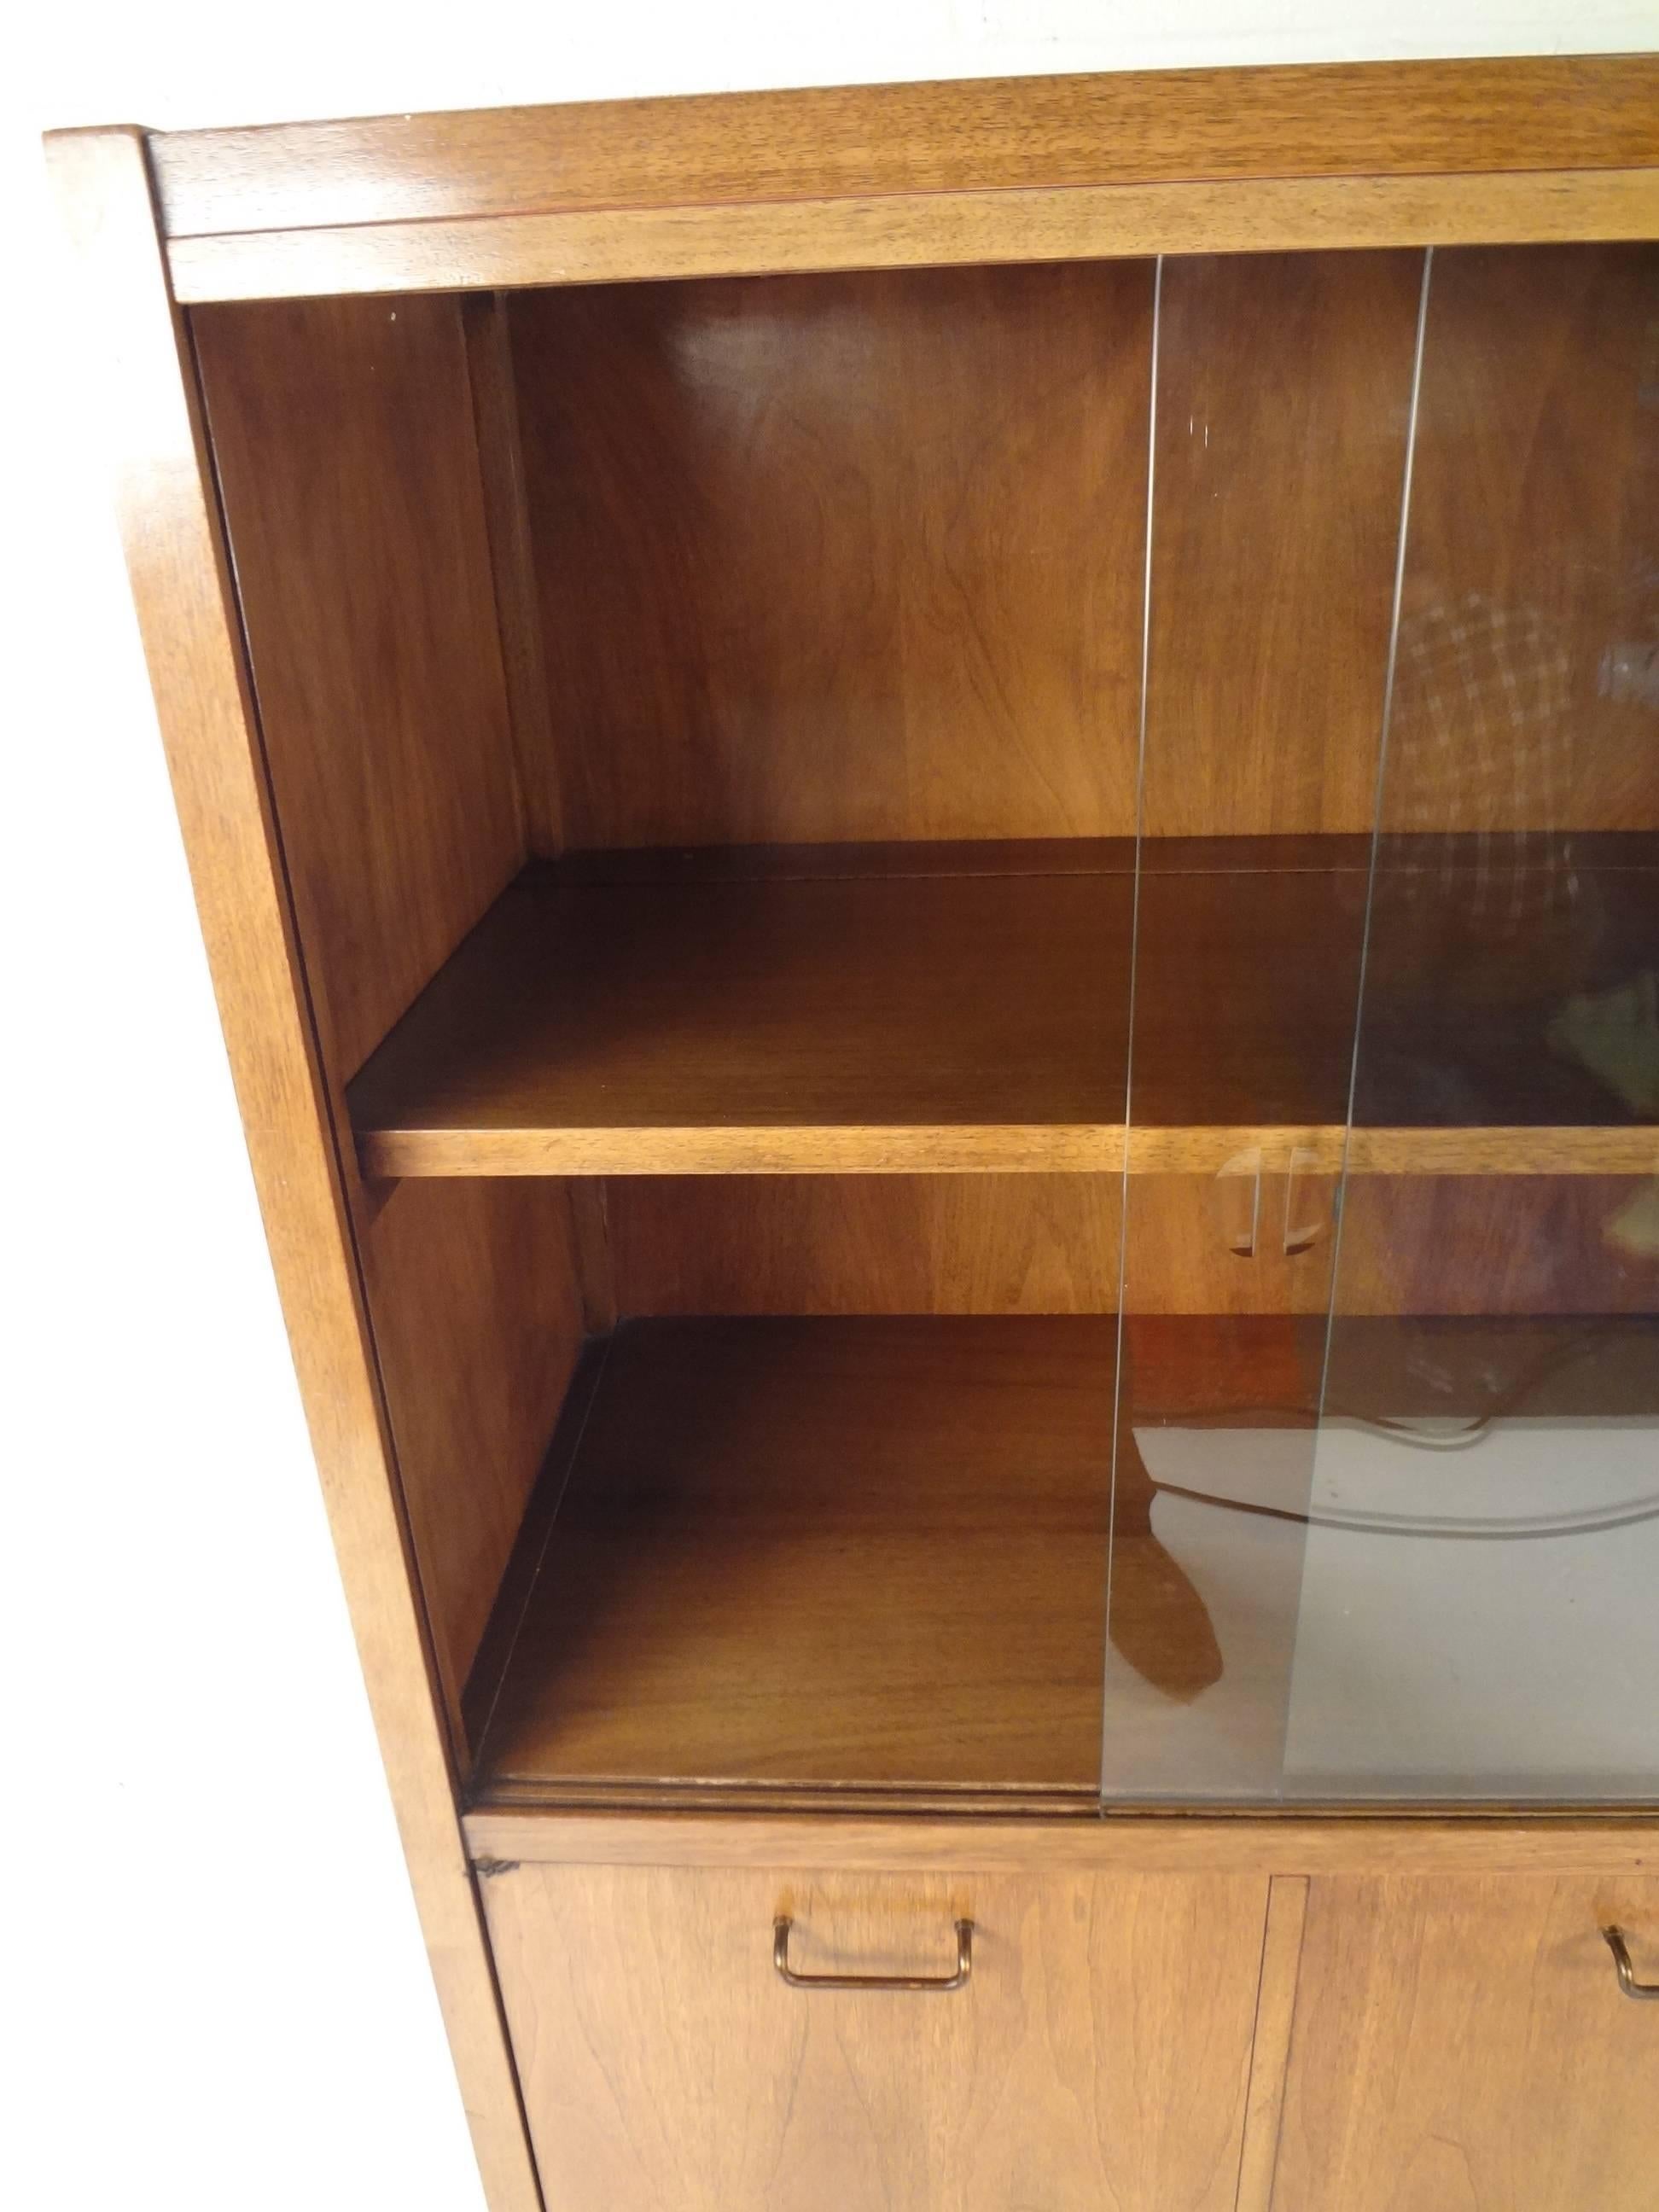 Late 20th Century Mid-Century Modern Display Cabinet by American of Martinsville